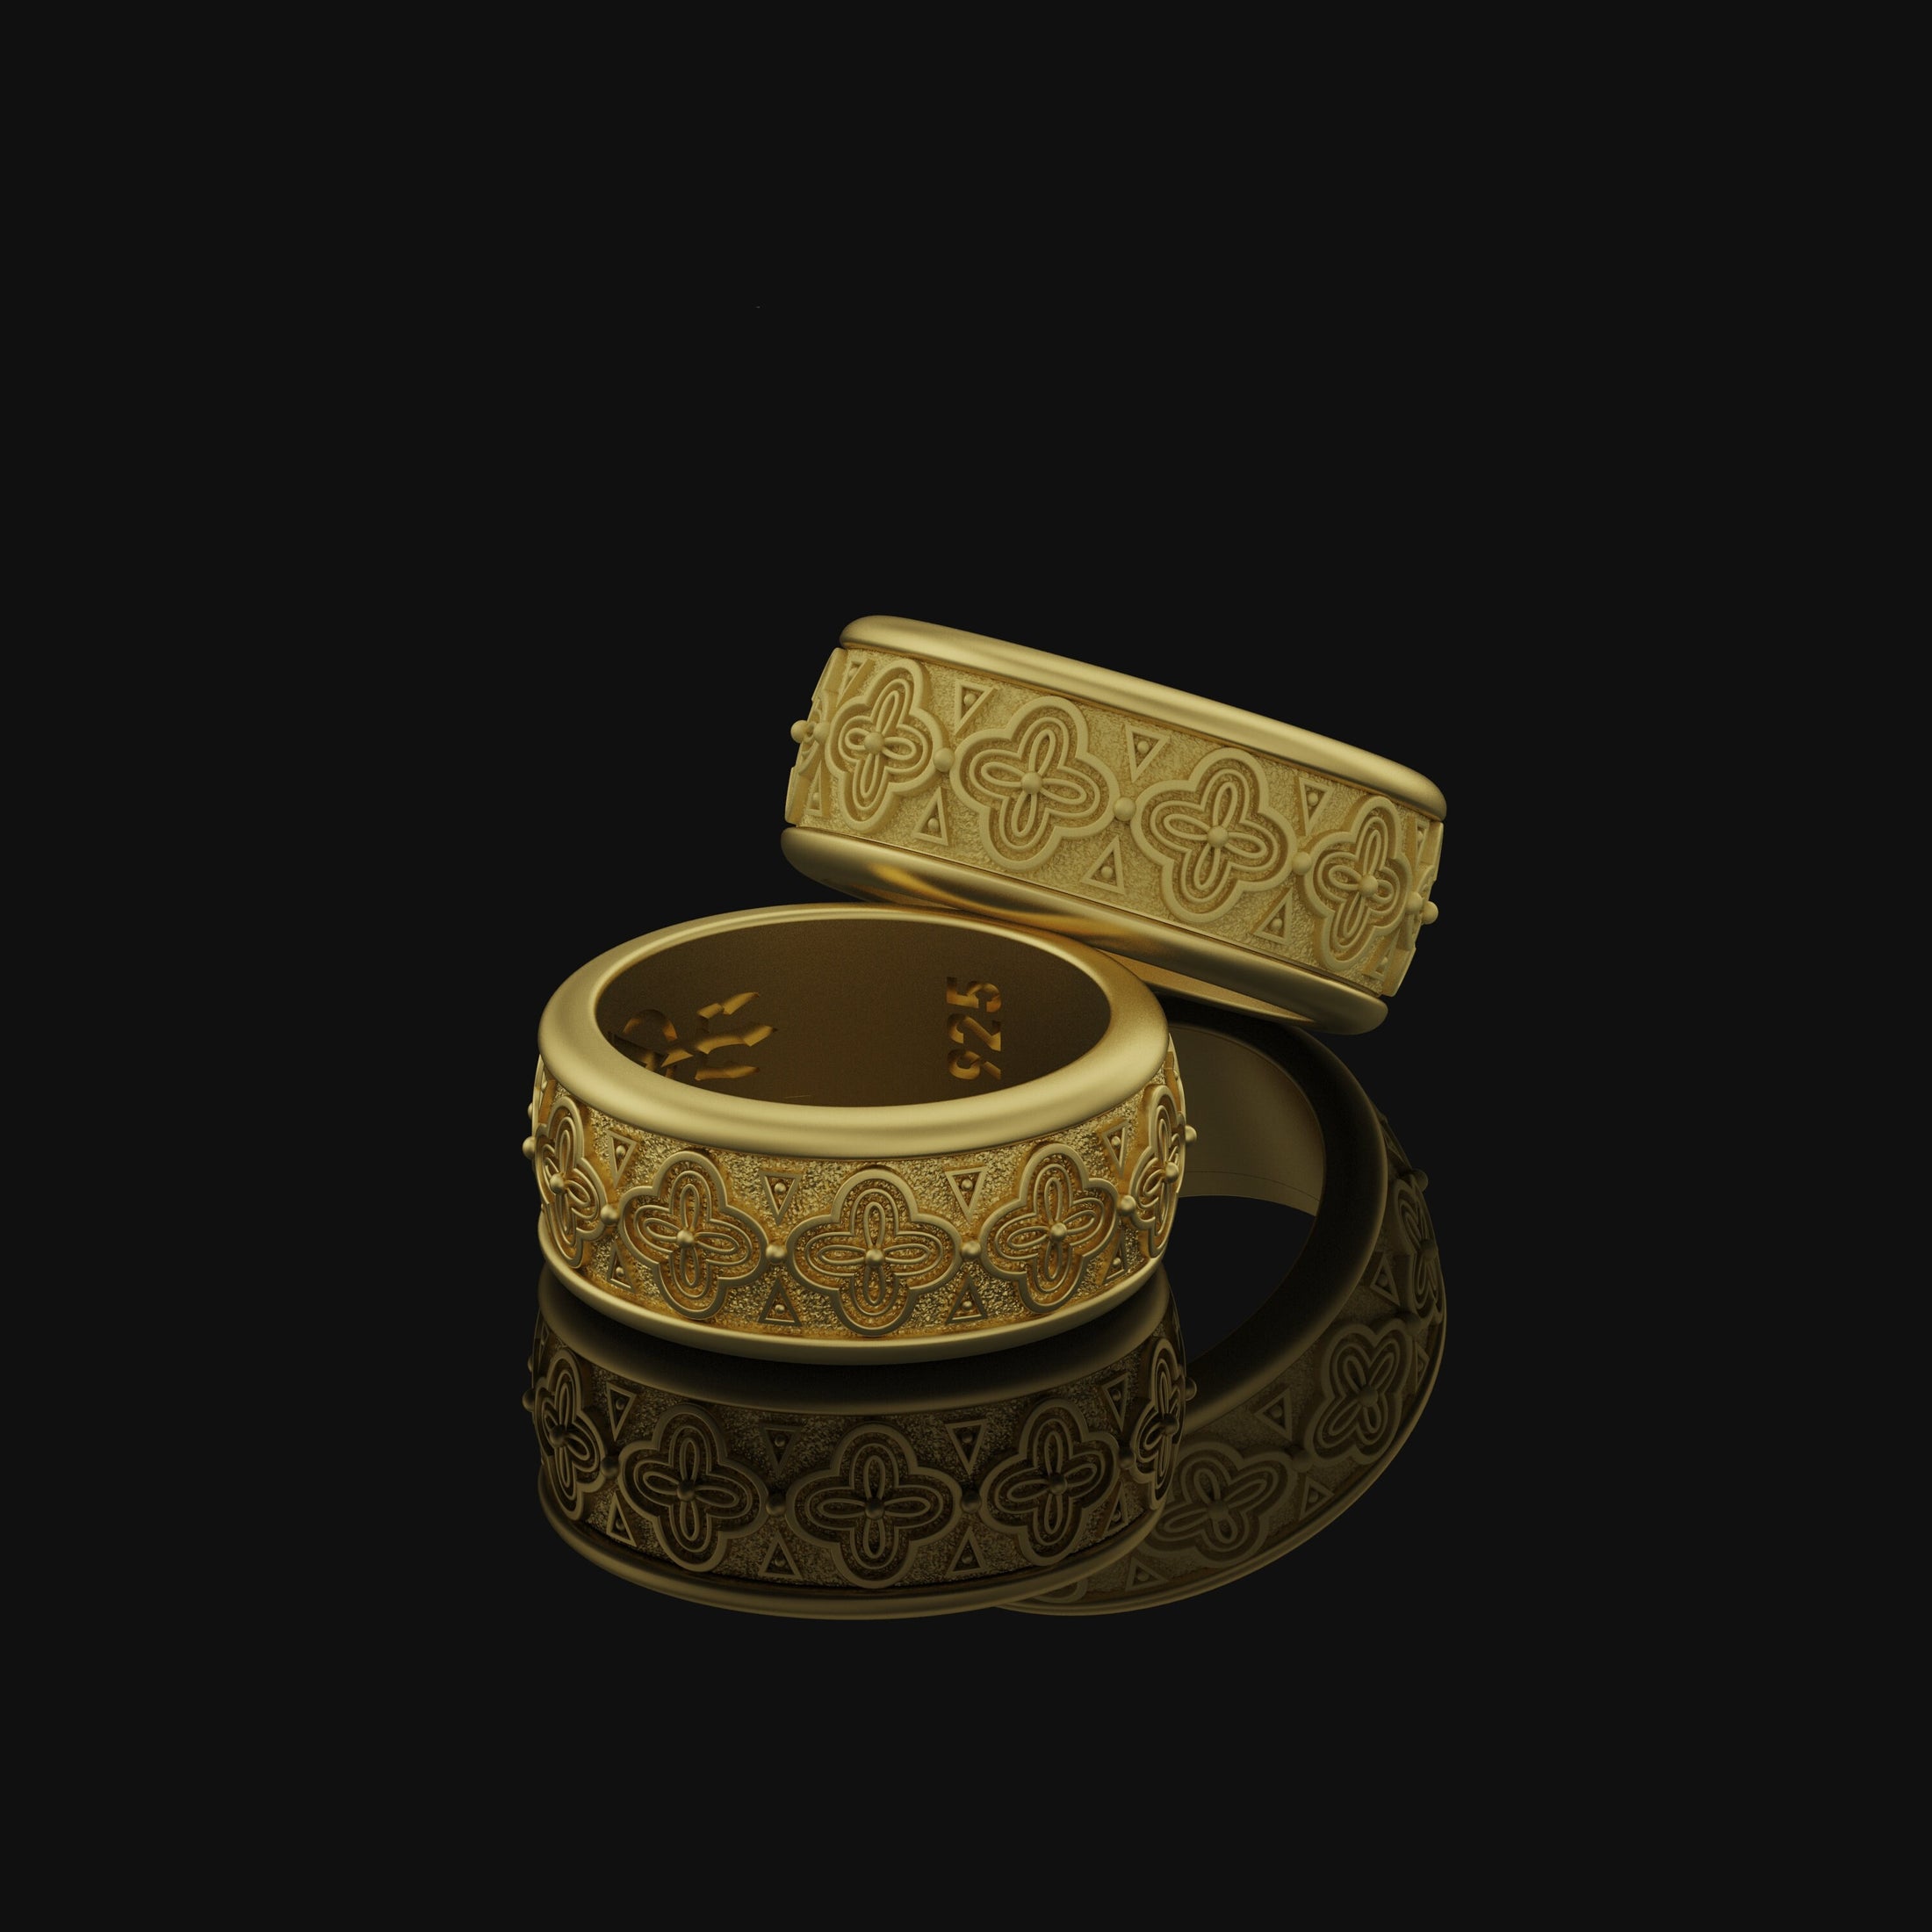 Rotating Floral Band - Engravable Gold Finish